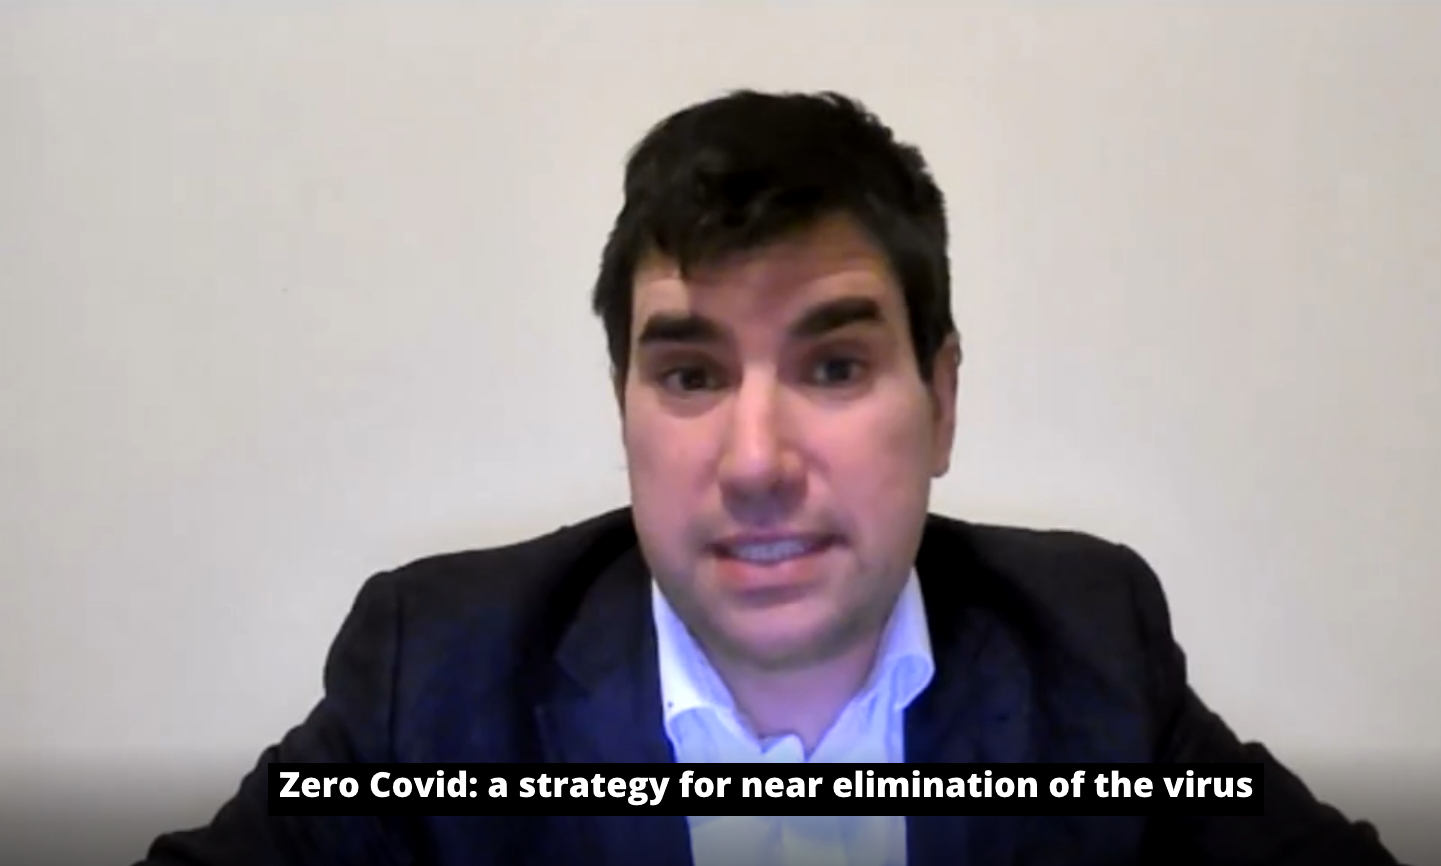 Richard Burgon MP with the caption Zero Covid: a strategy for near-elimination of the virus